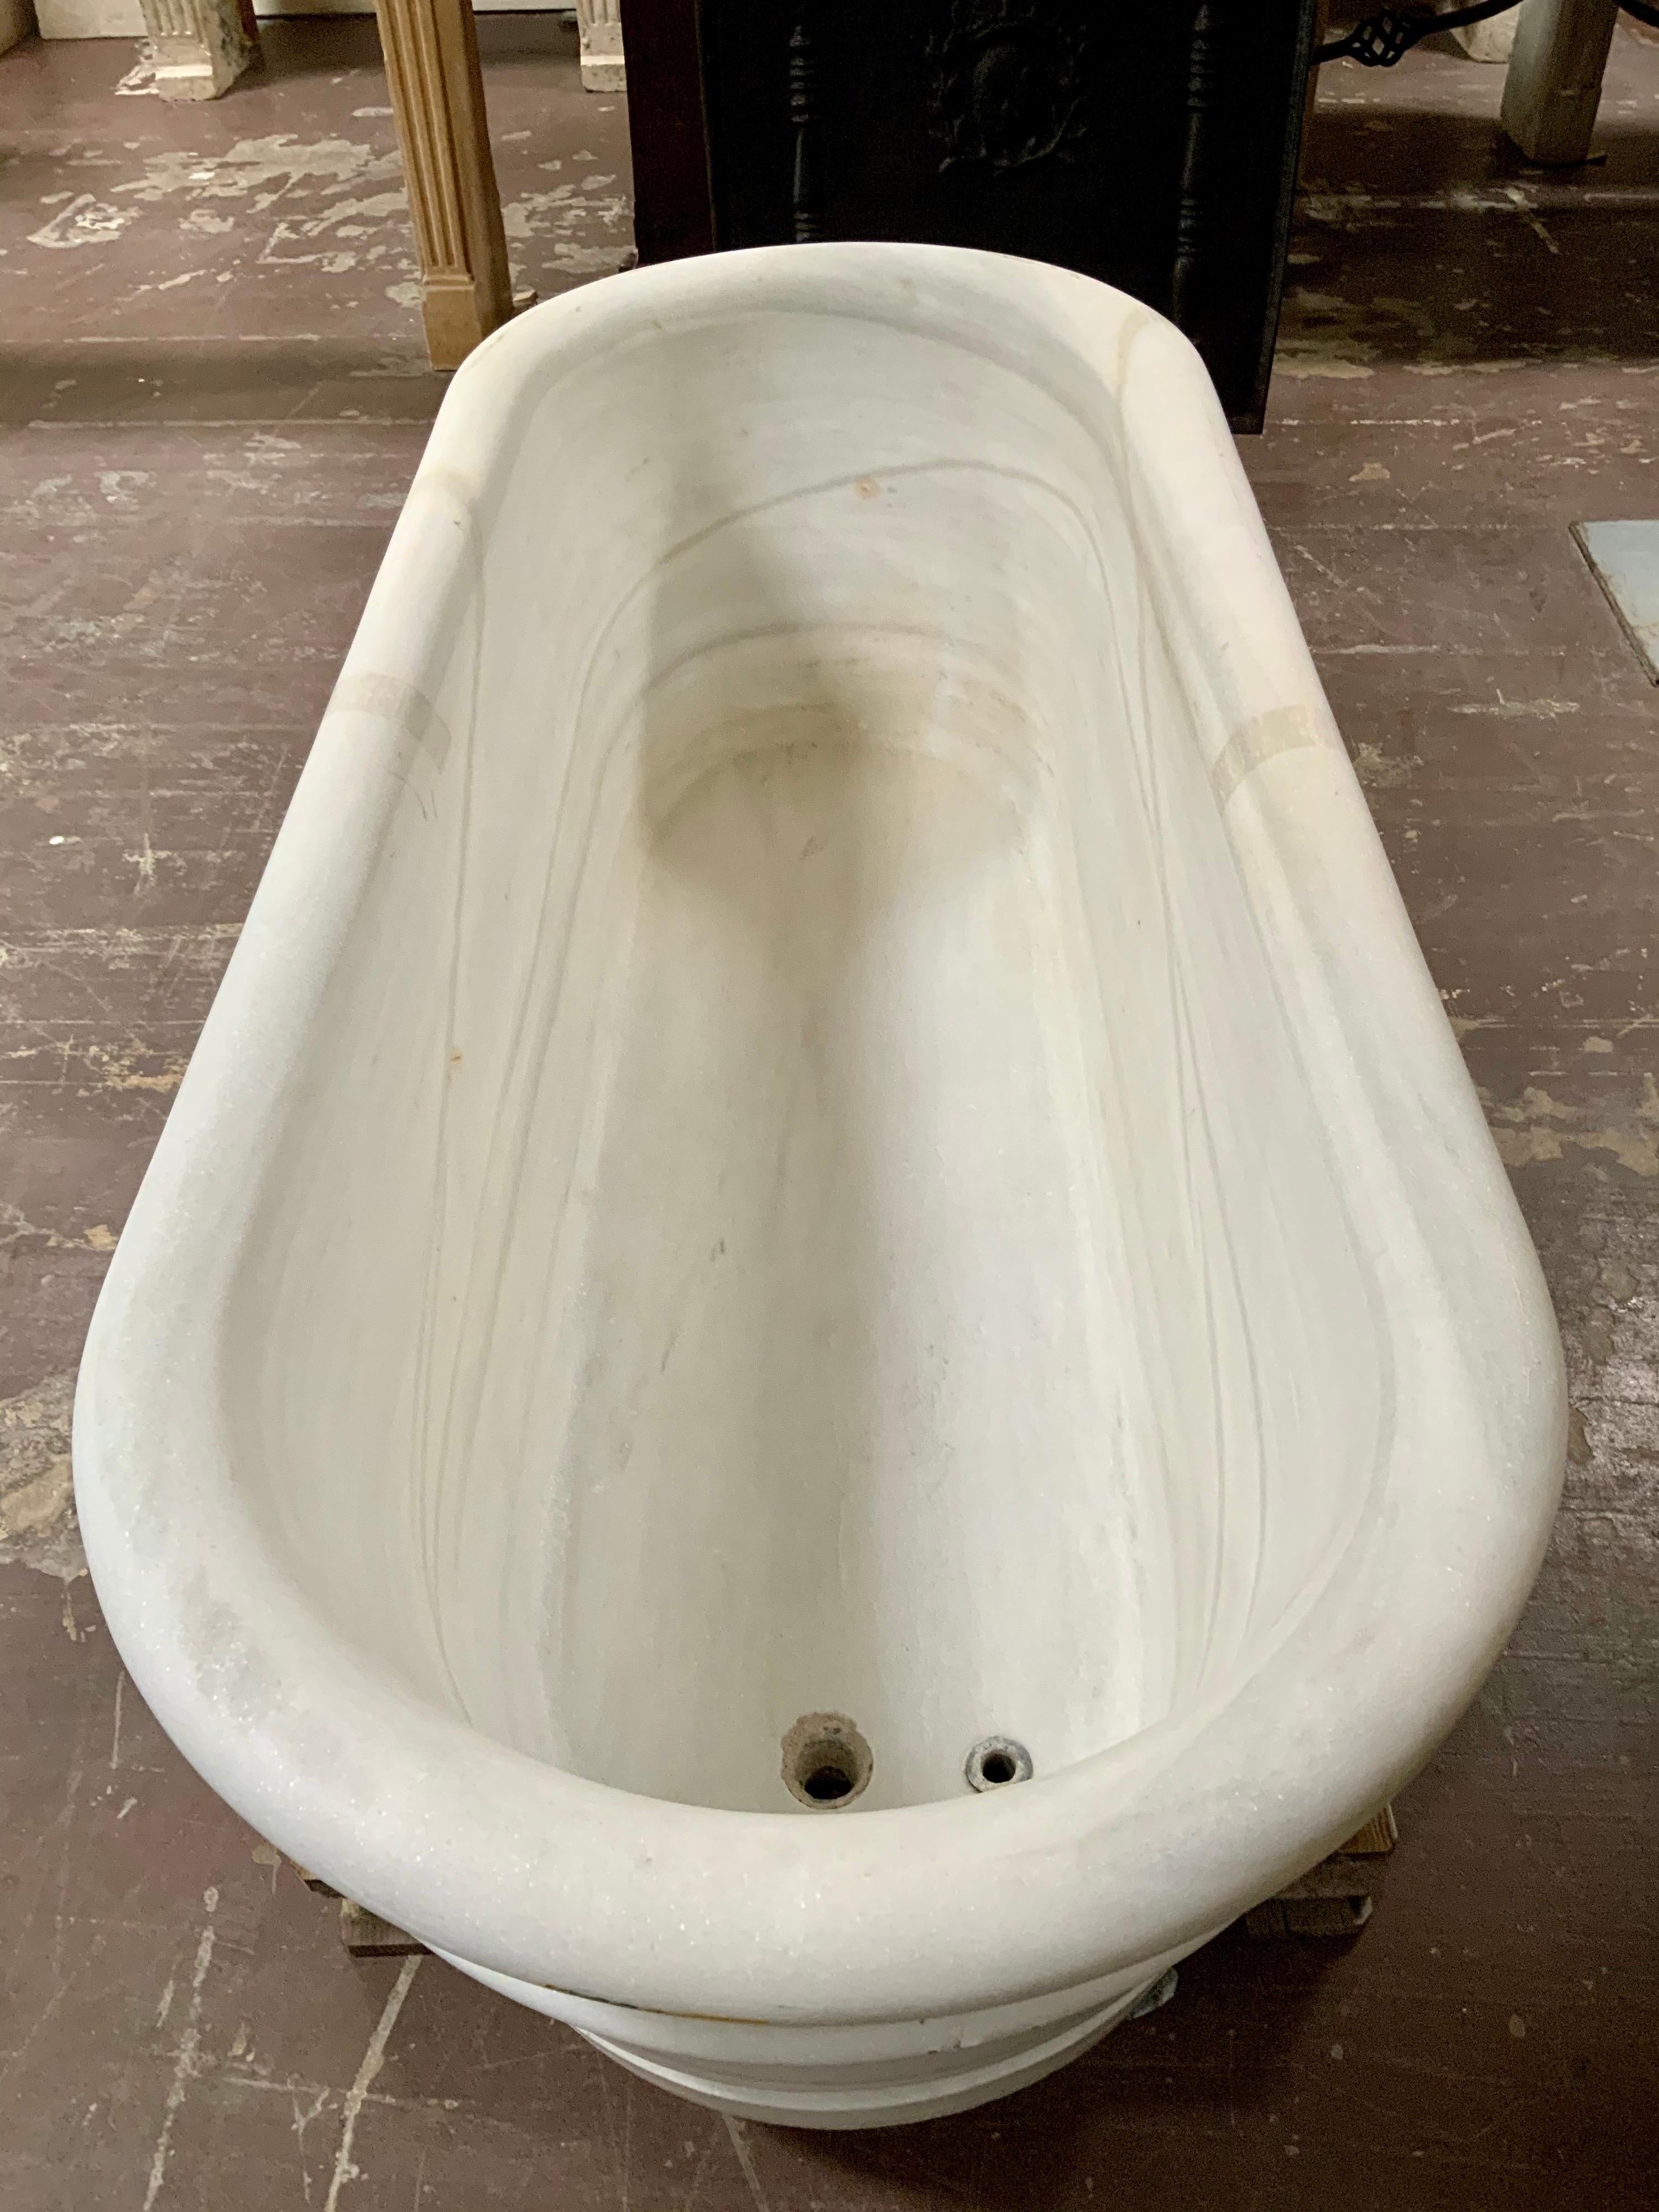 This beautiful marble Baignoire origins from Italy, circa 1900.